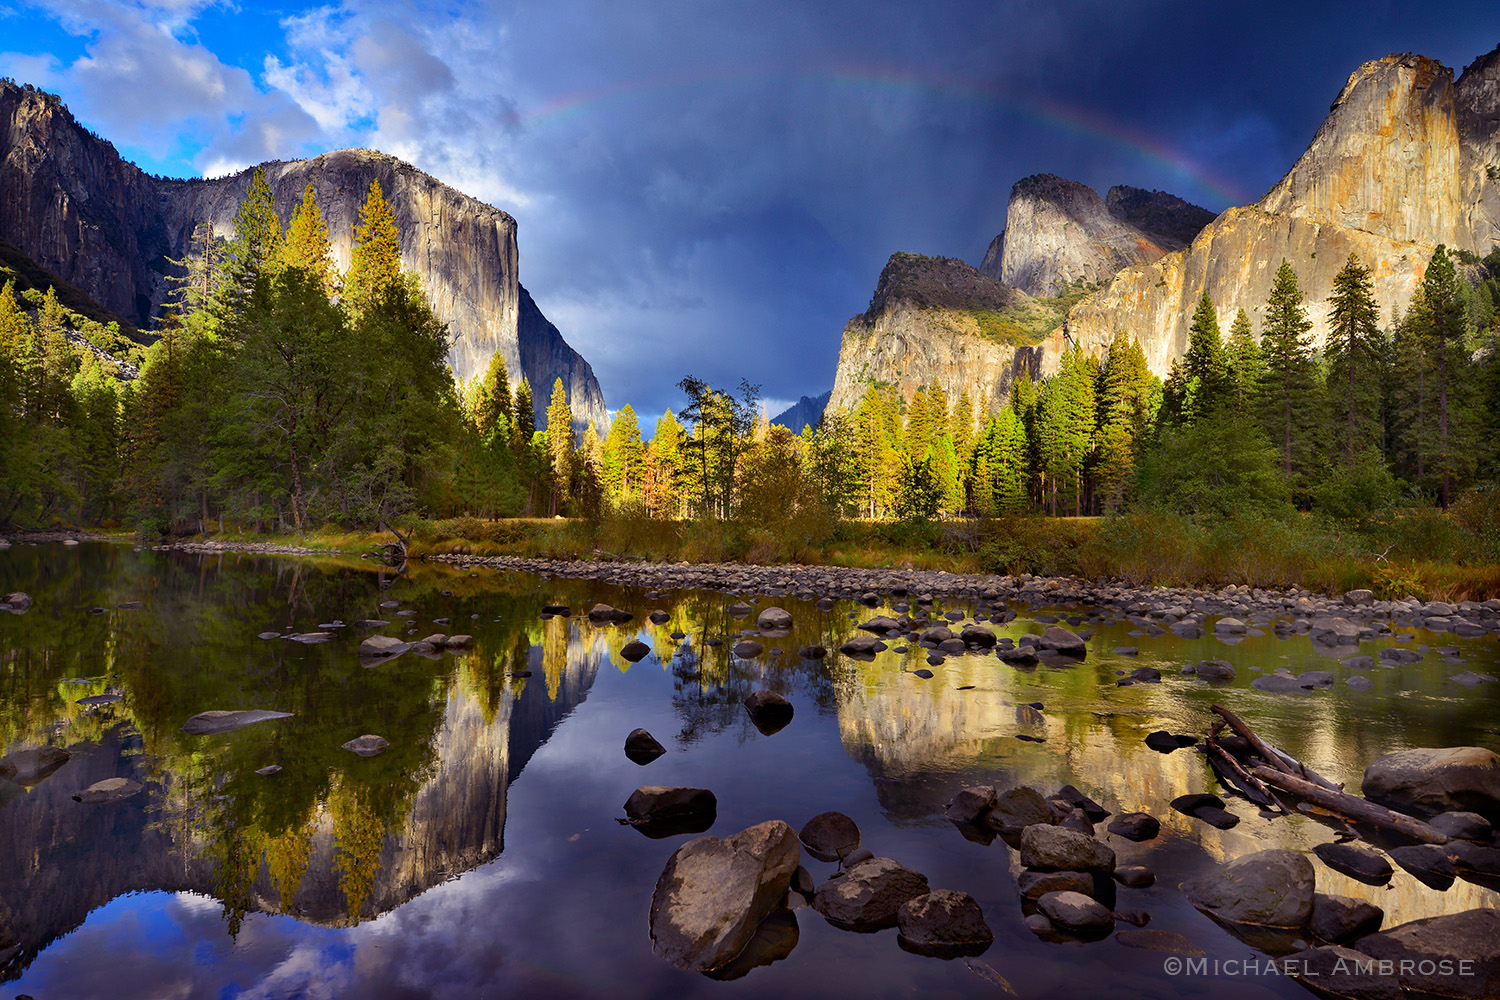 Reflections of El Capitan, Cathedral Rocks, and the Merced River come alive after a storm in Yosemite Valley, Yosemite National Park.